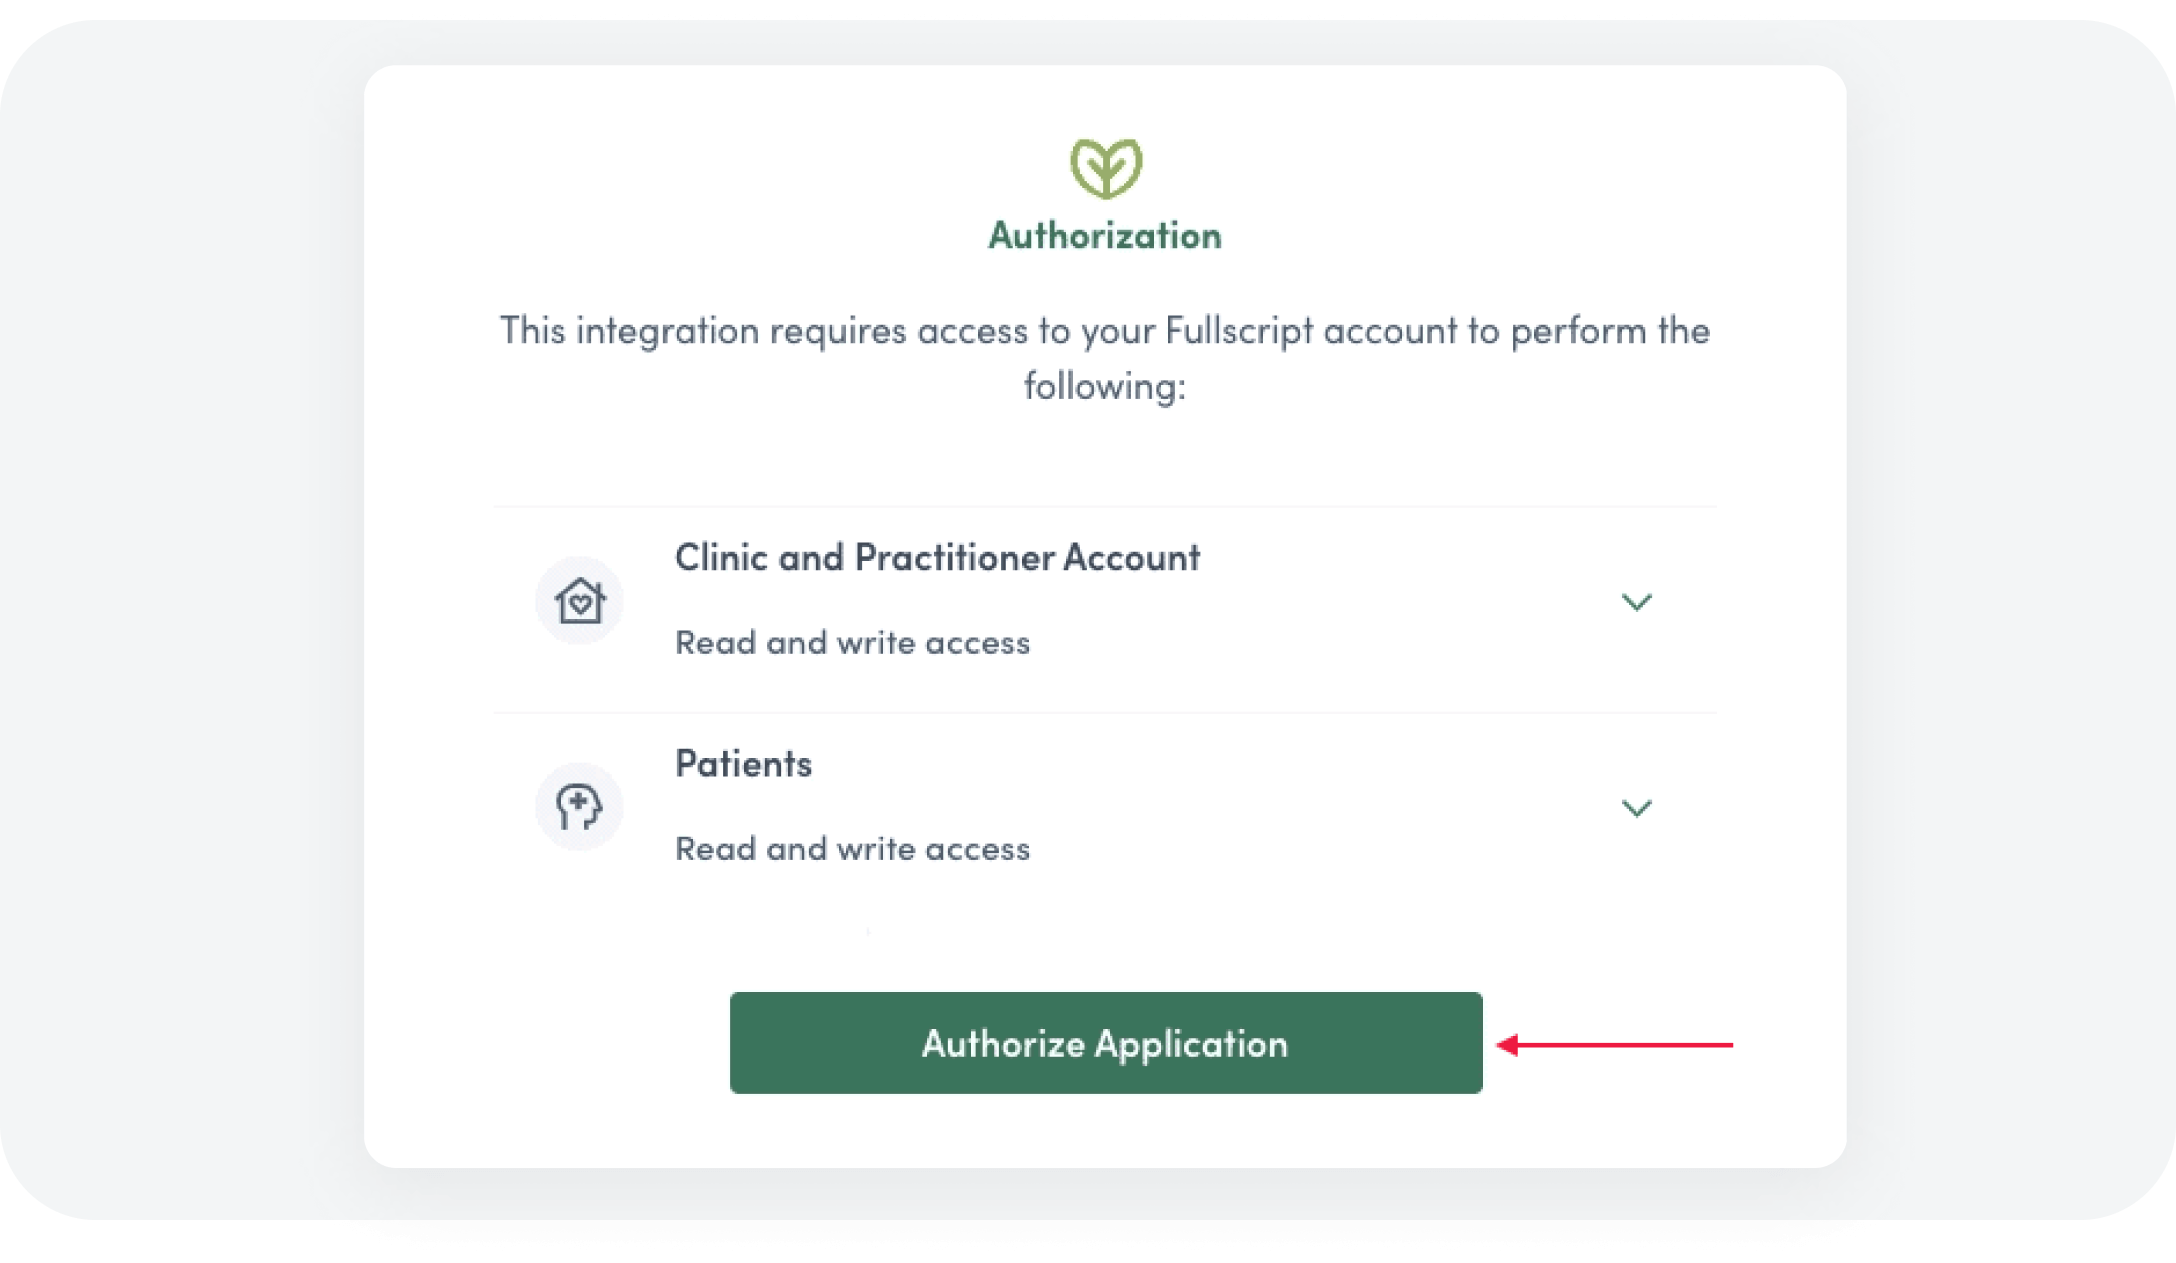 screenshot of a step to authorize the application to complete the account integration